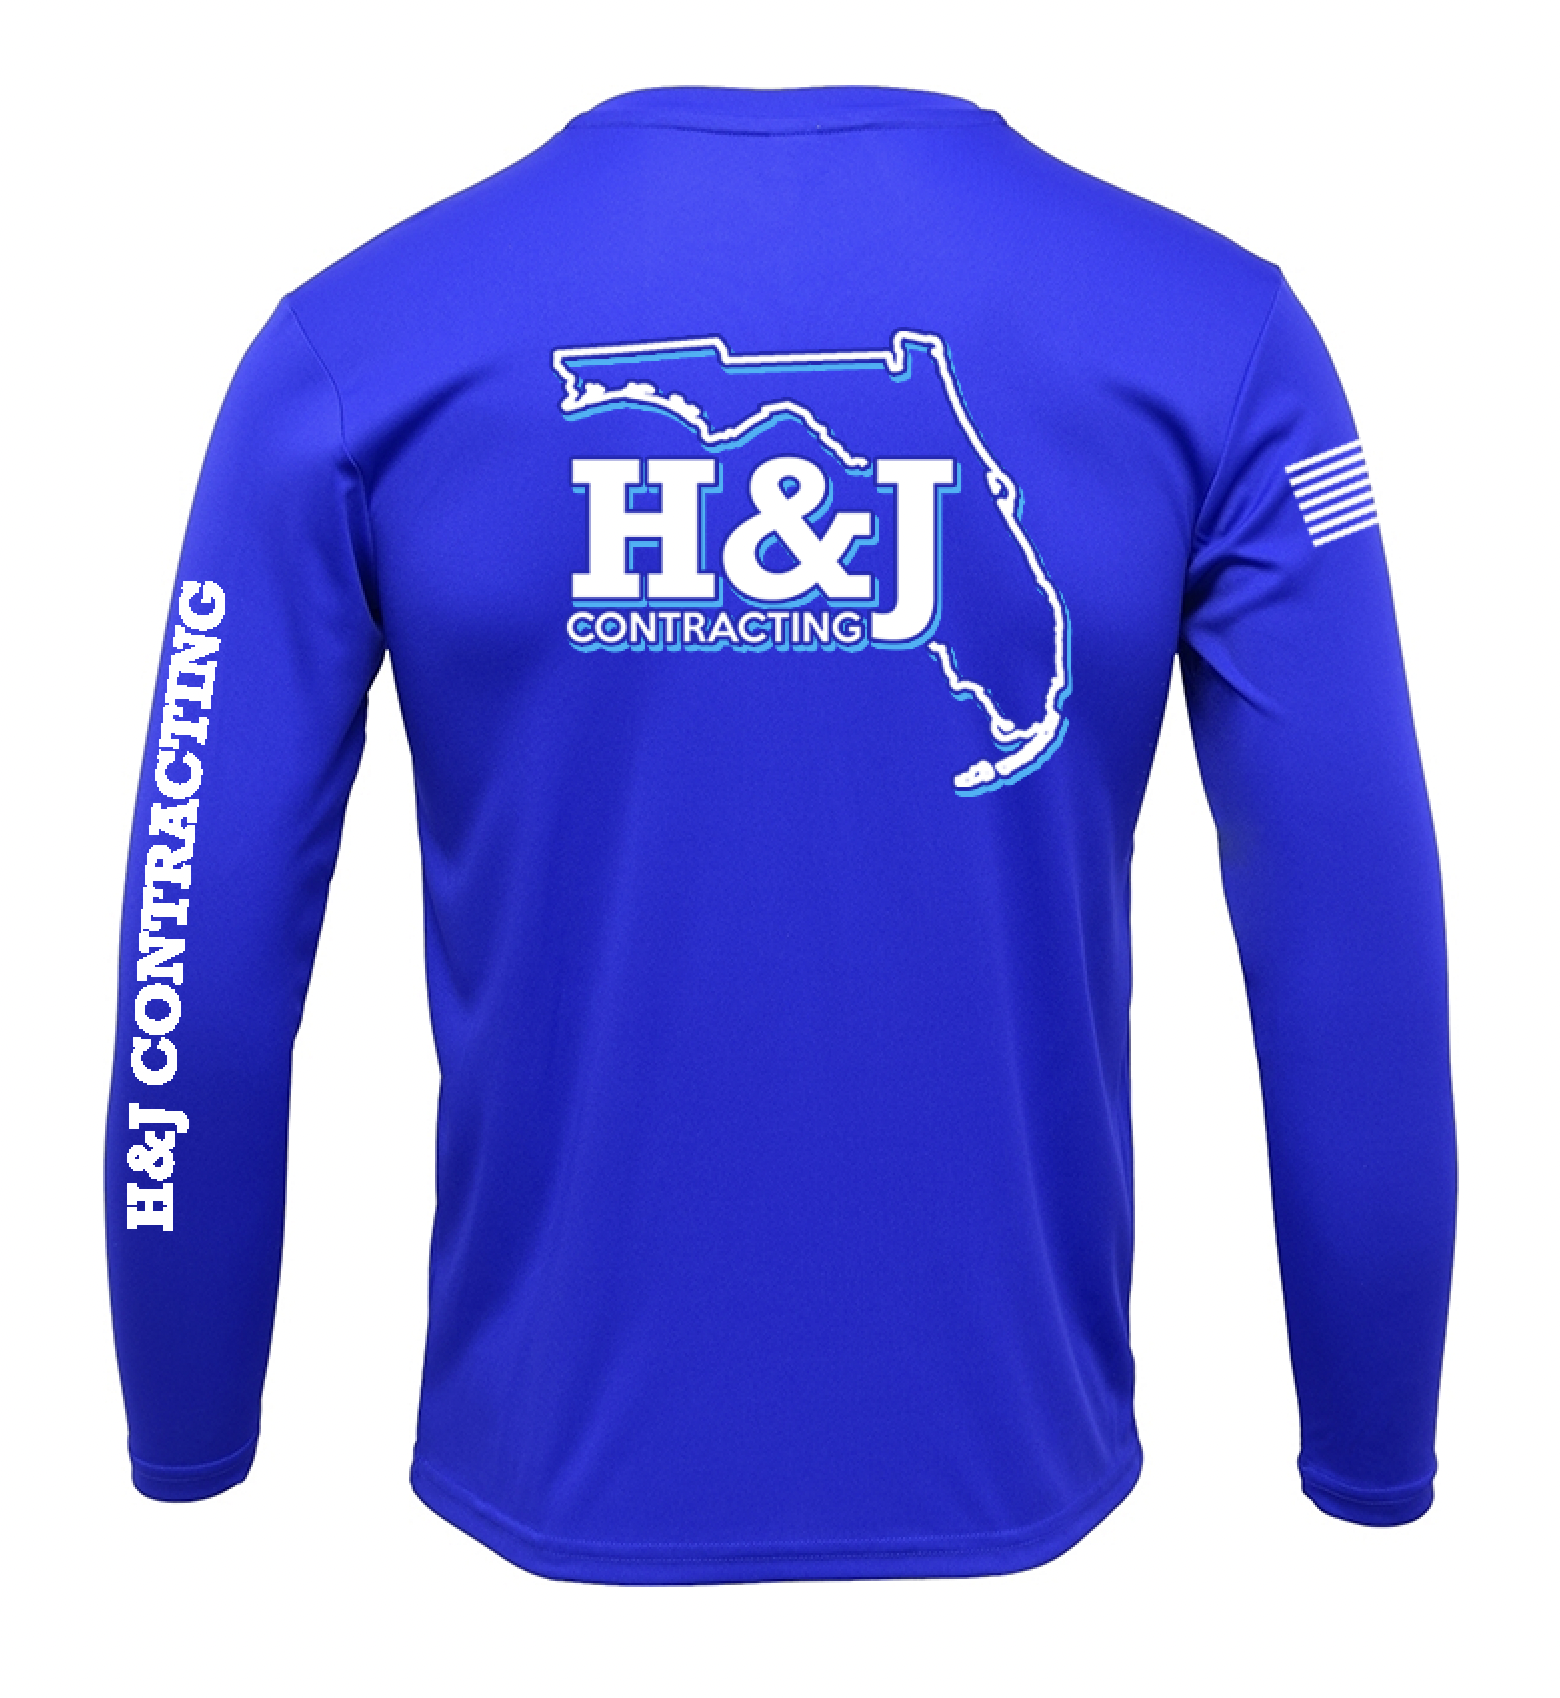 FLORIDA H&J Contracting- Royal Blue Long Sleeve Dry Fit